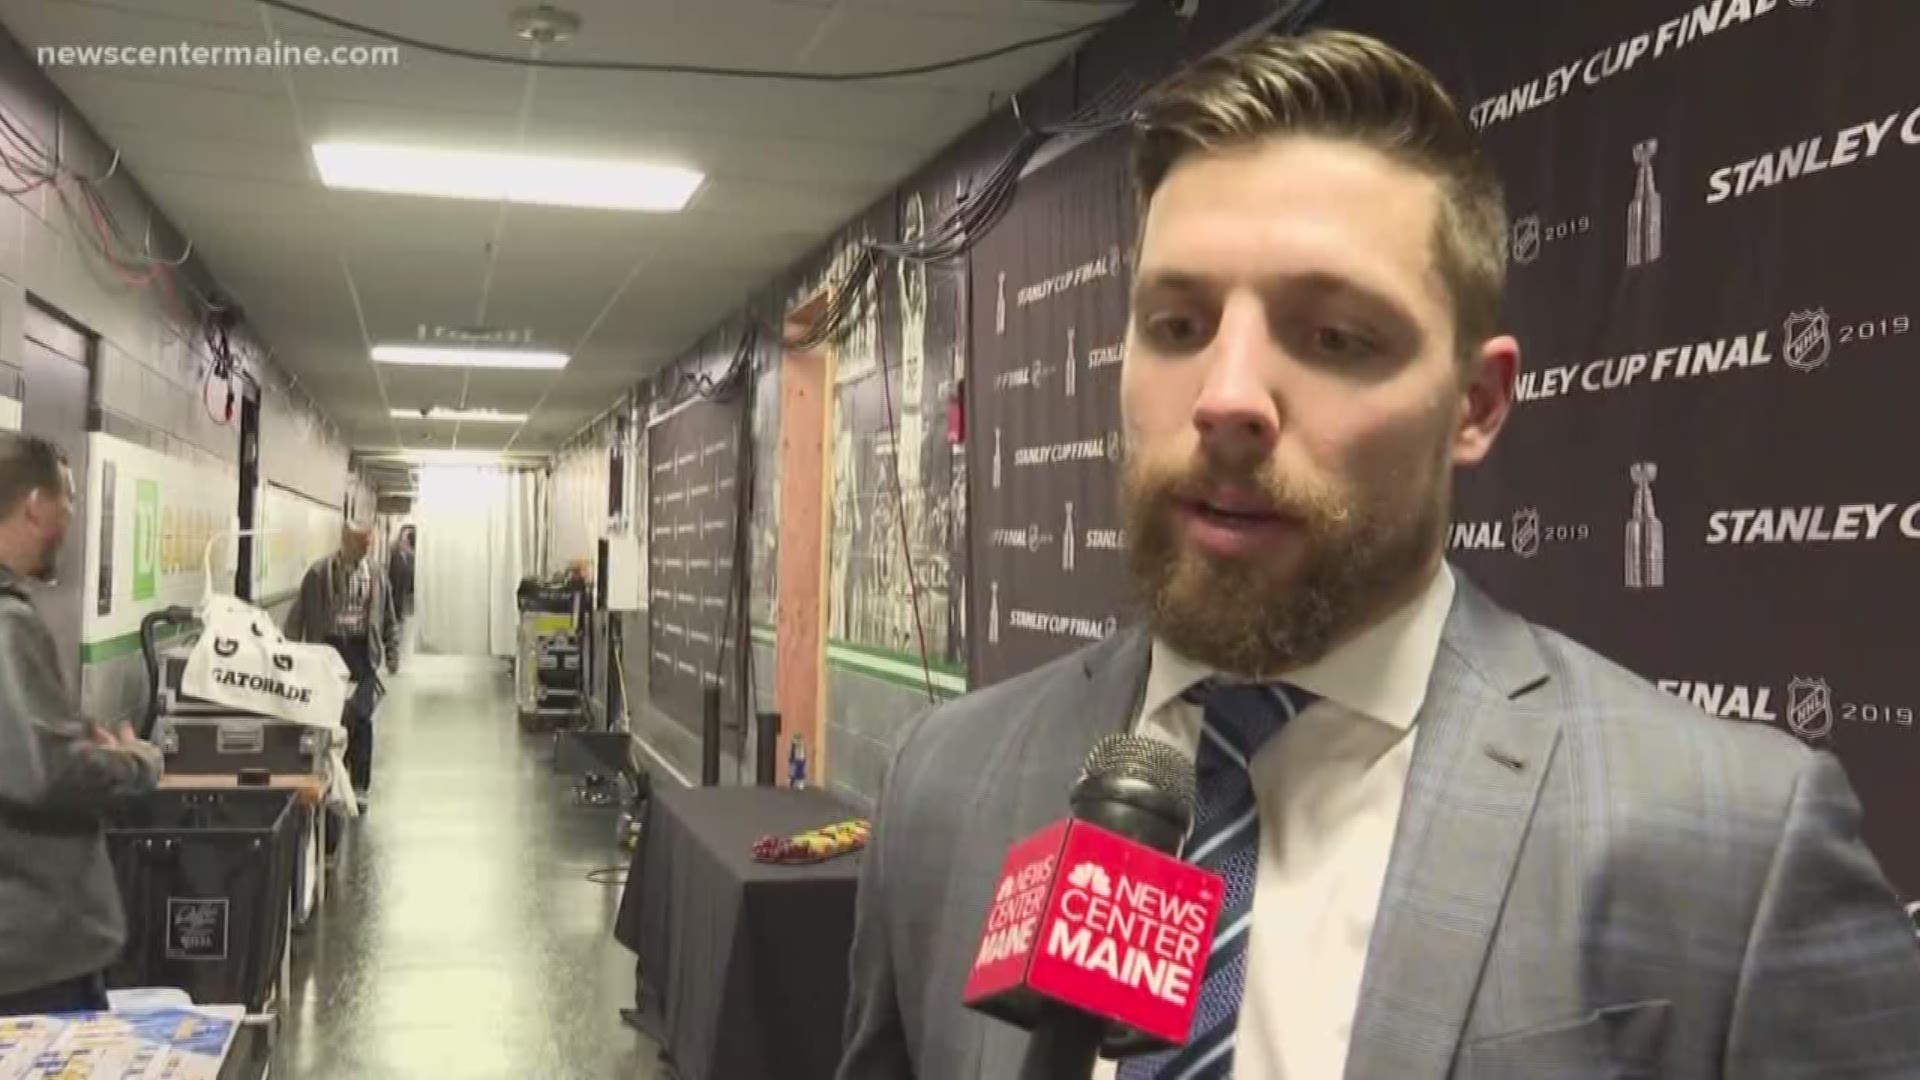 Finding the Maine connections at the Stanley Cup.